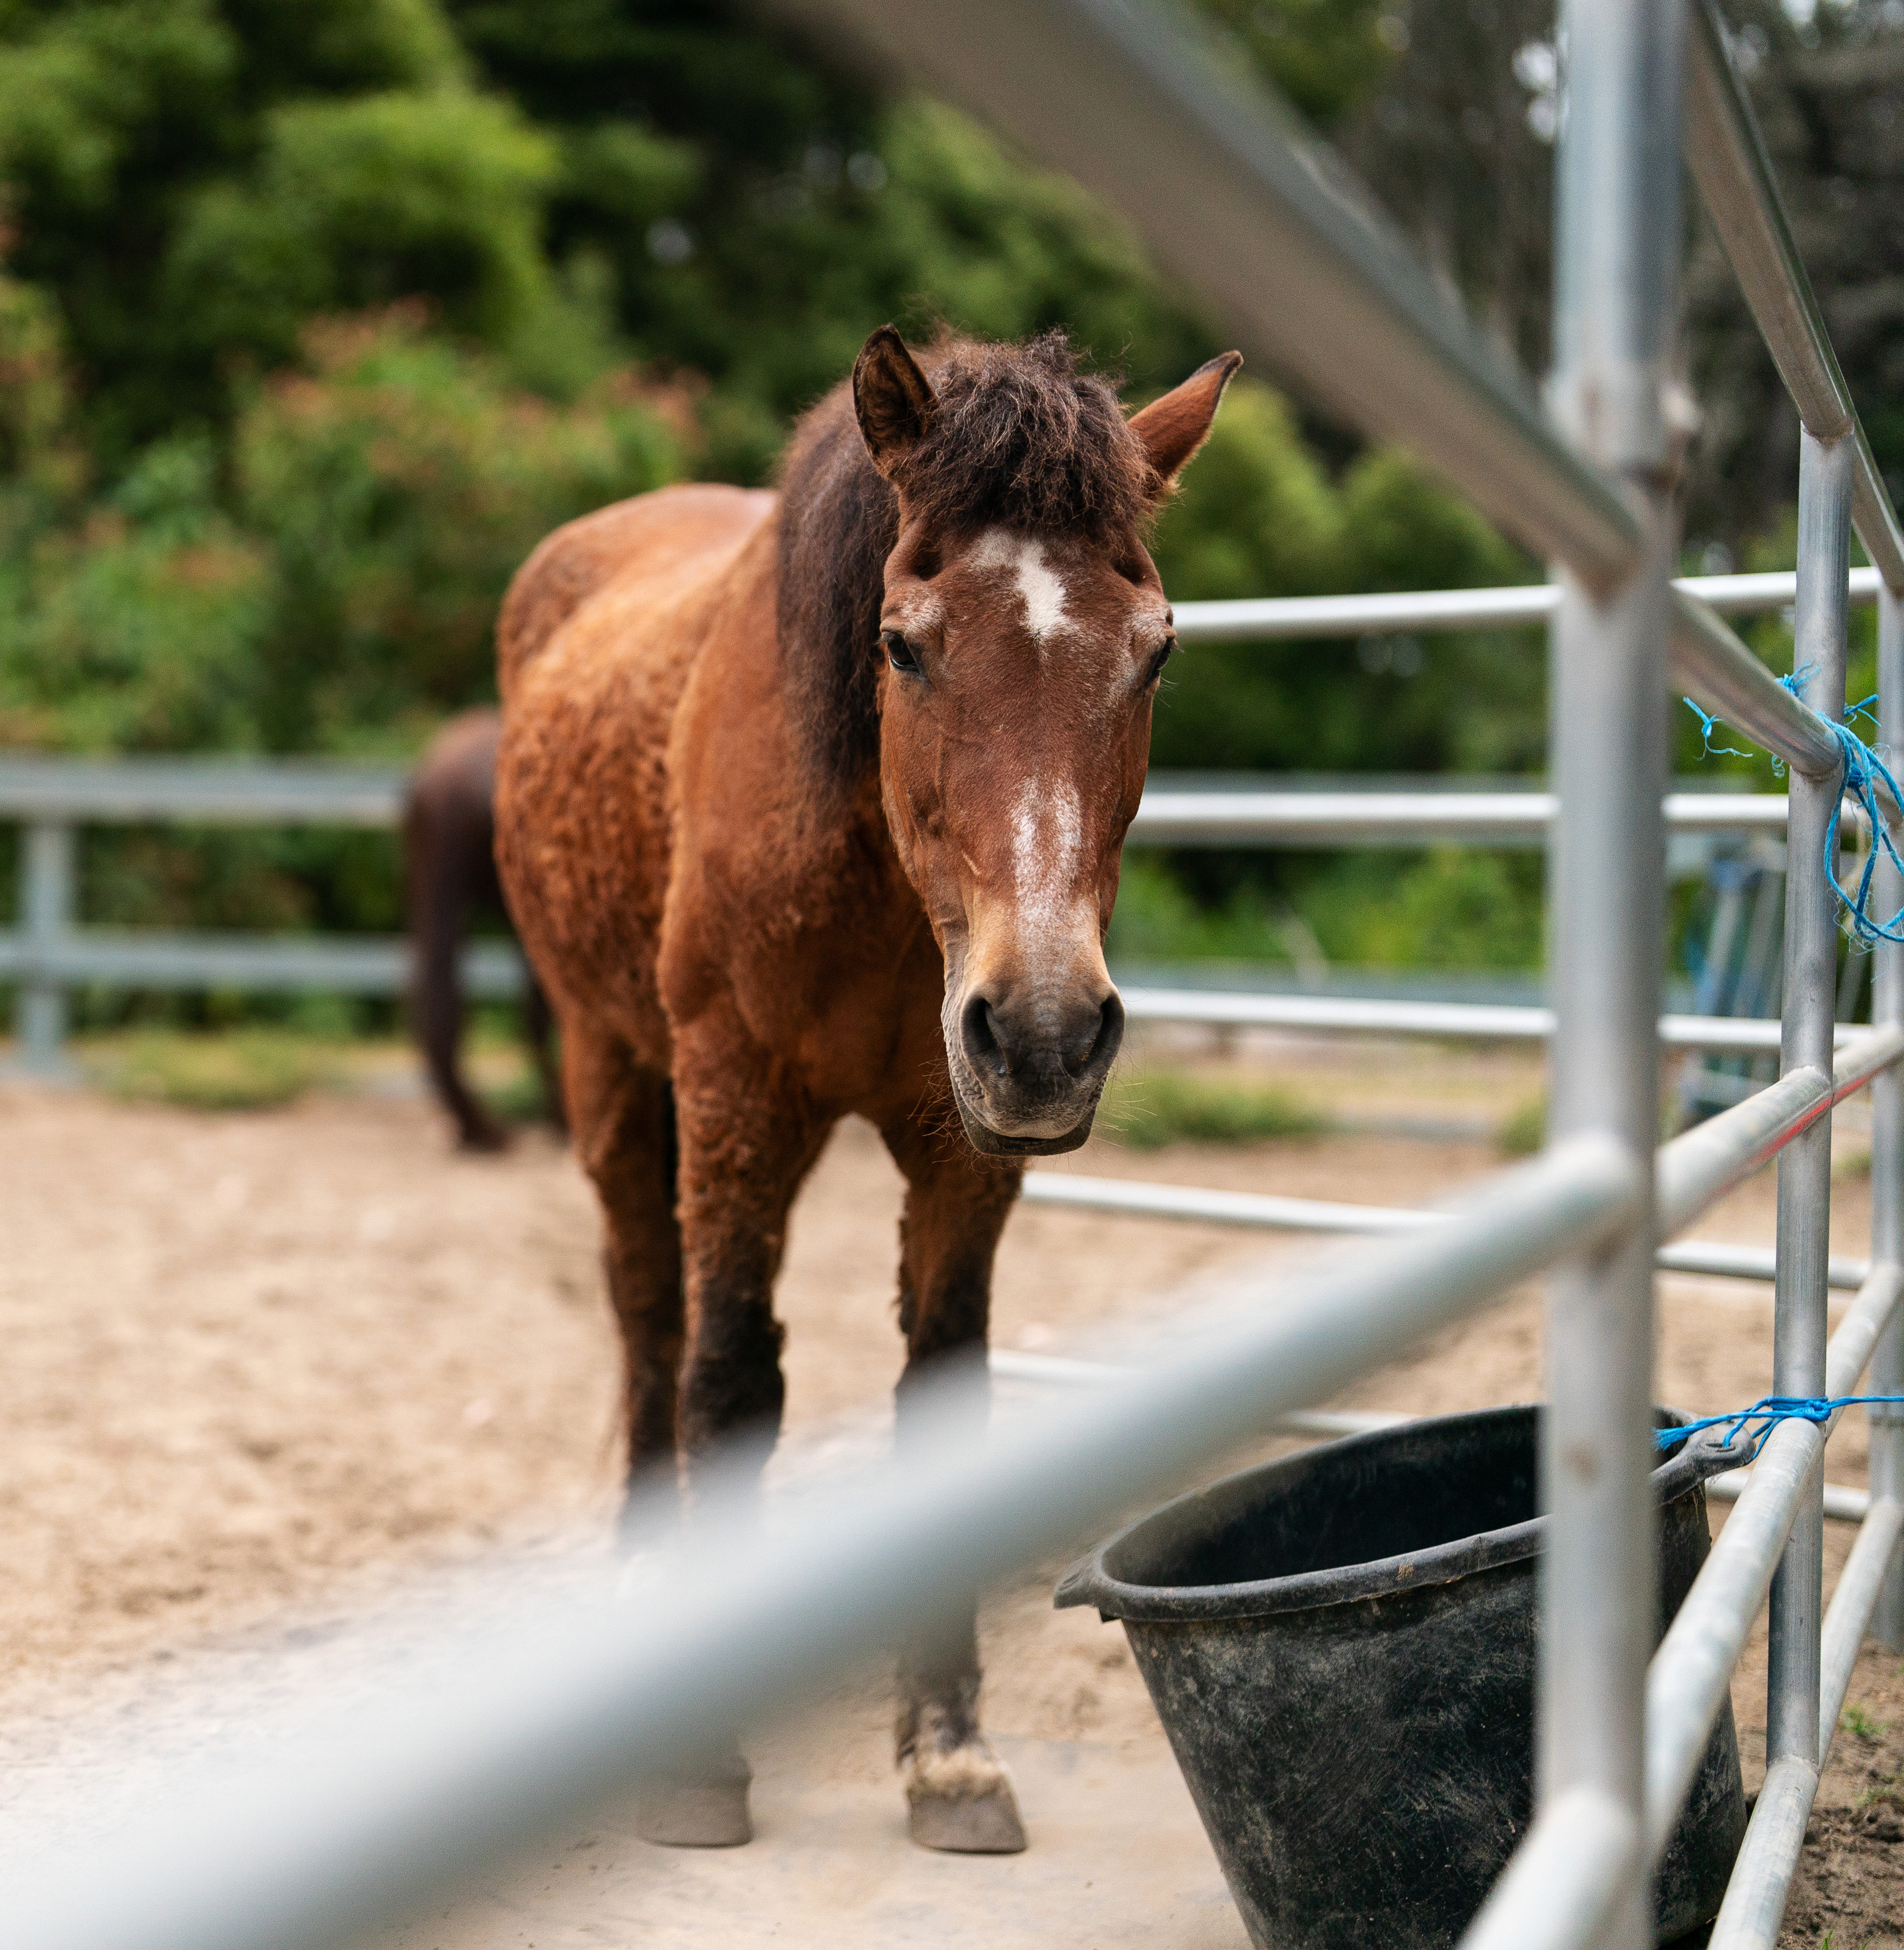 A chestnut horse stands inside a pen, looking directly at the camera, with a black bucket near a metal fence in the foreground.